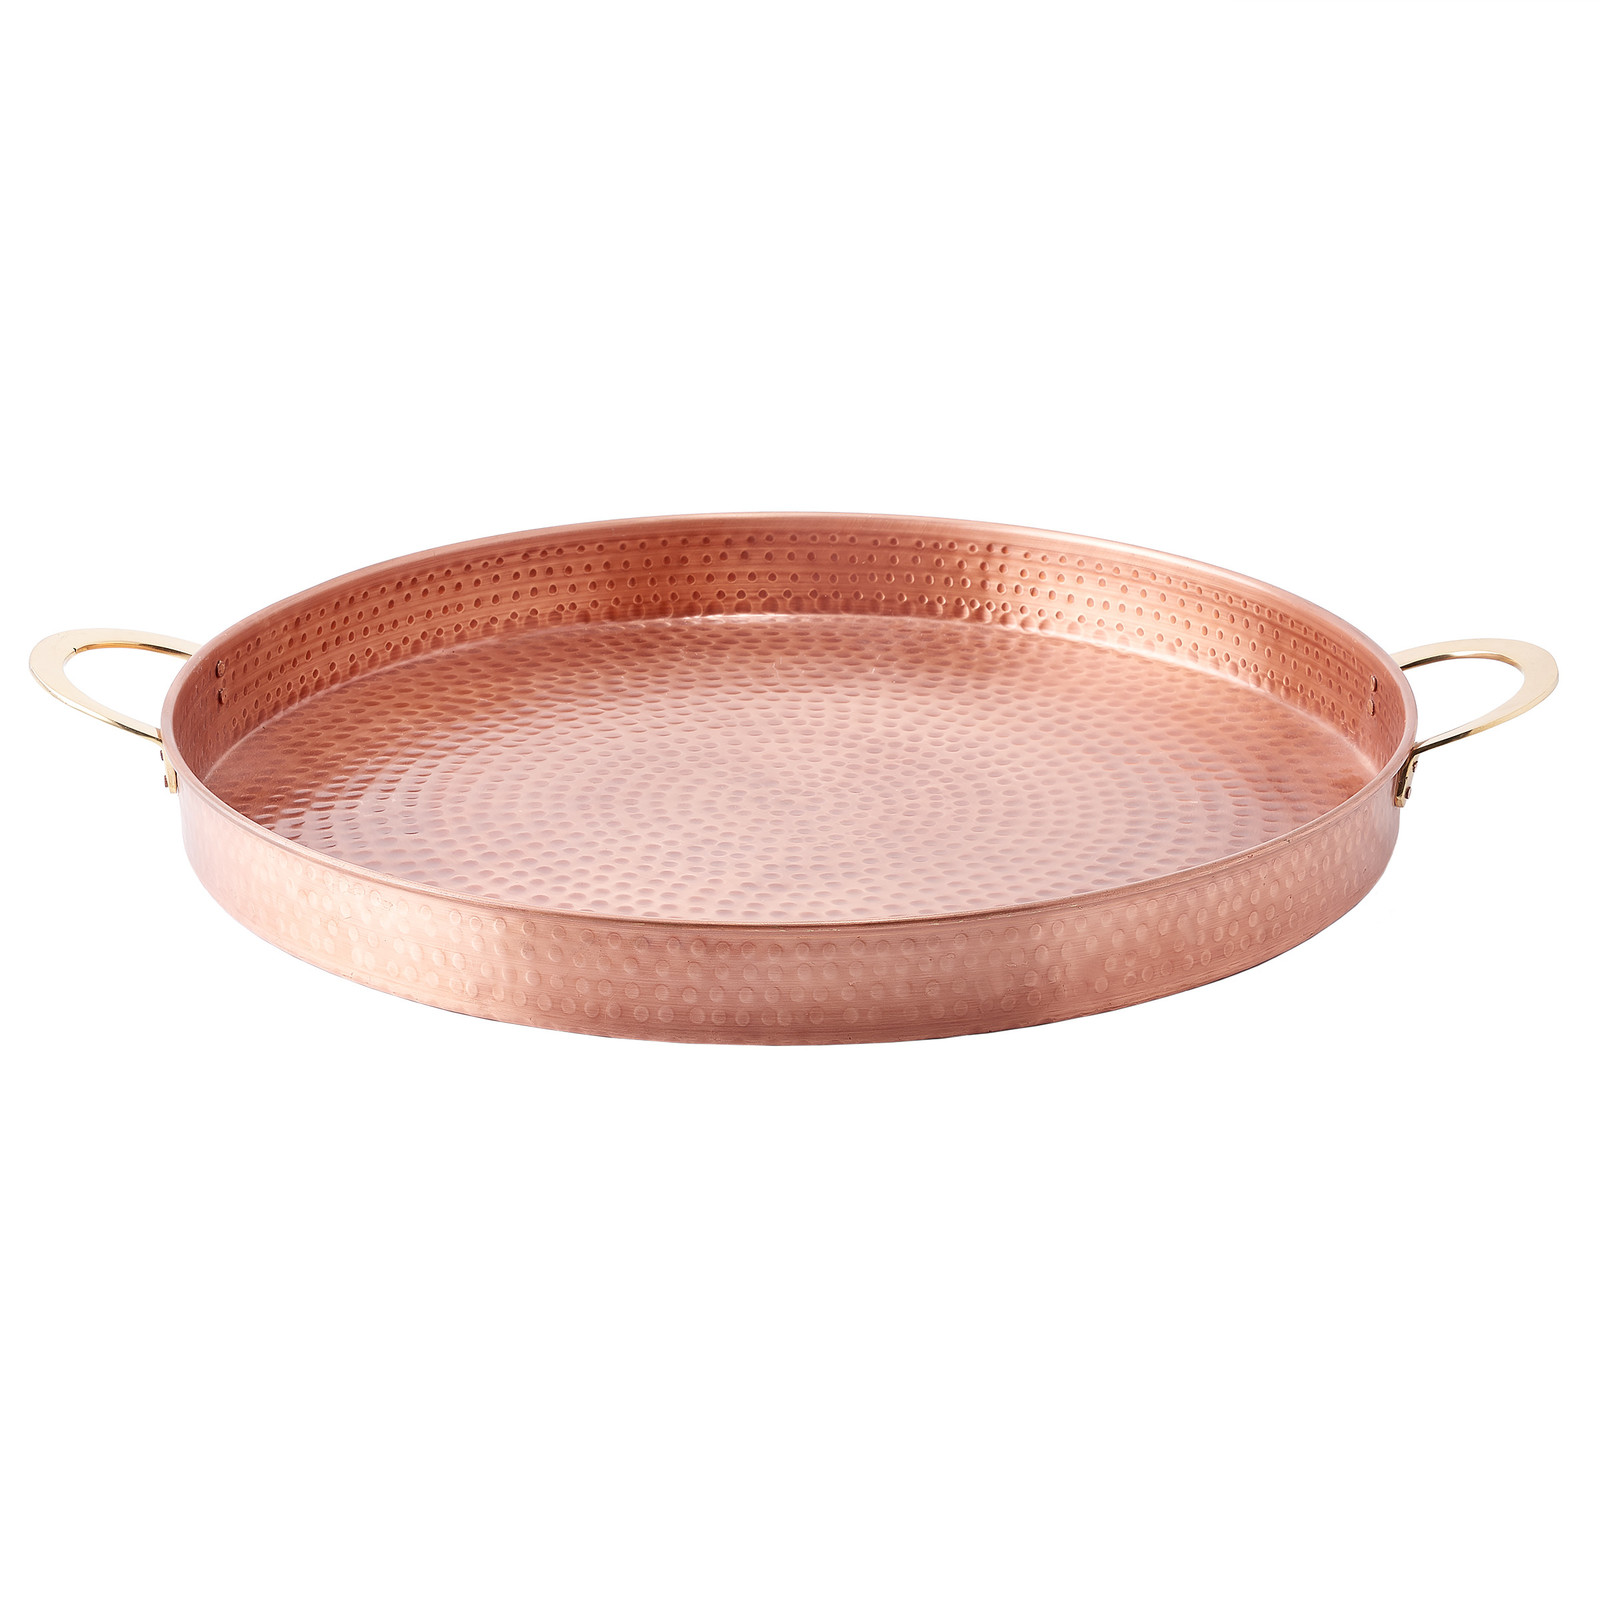 Round sheet made of hammered copper with handles